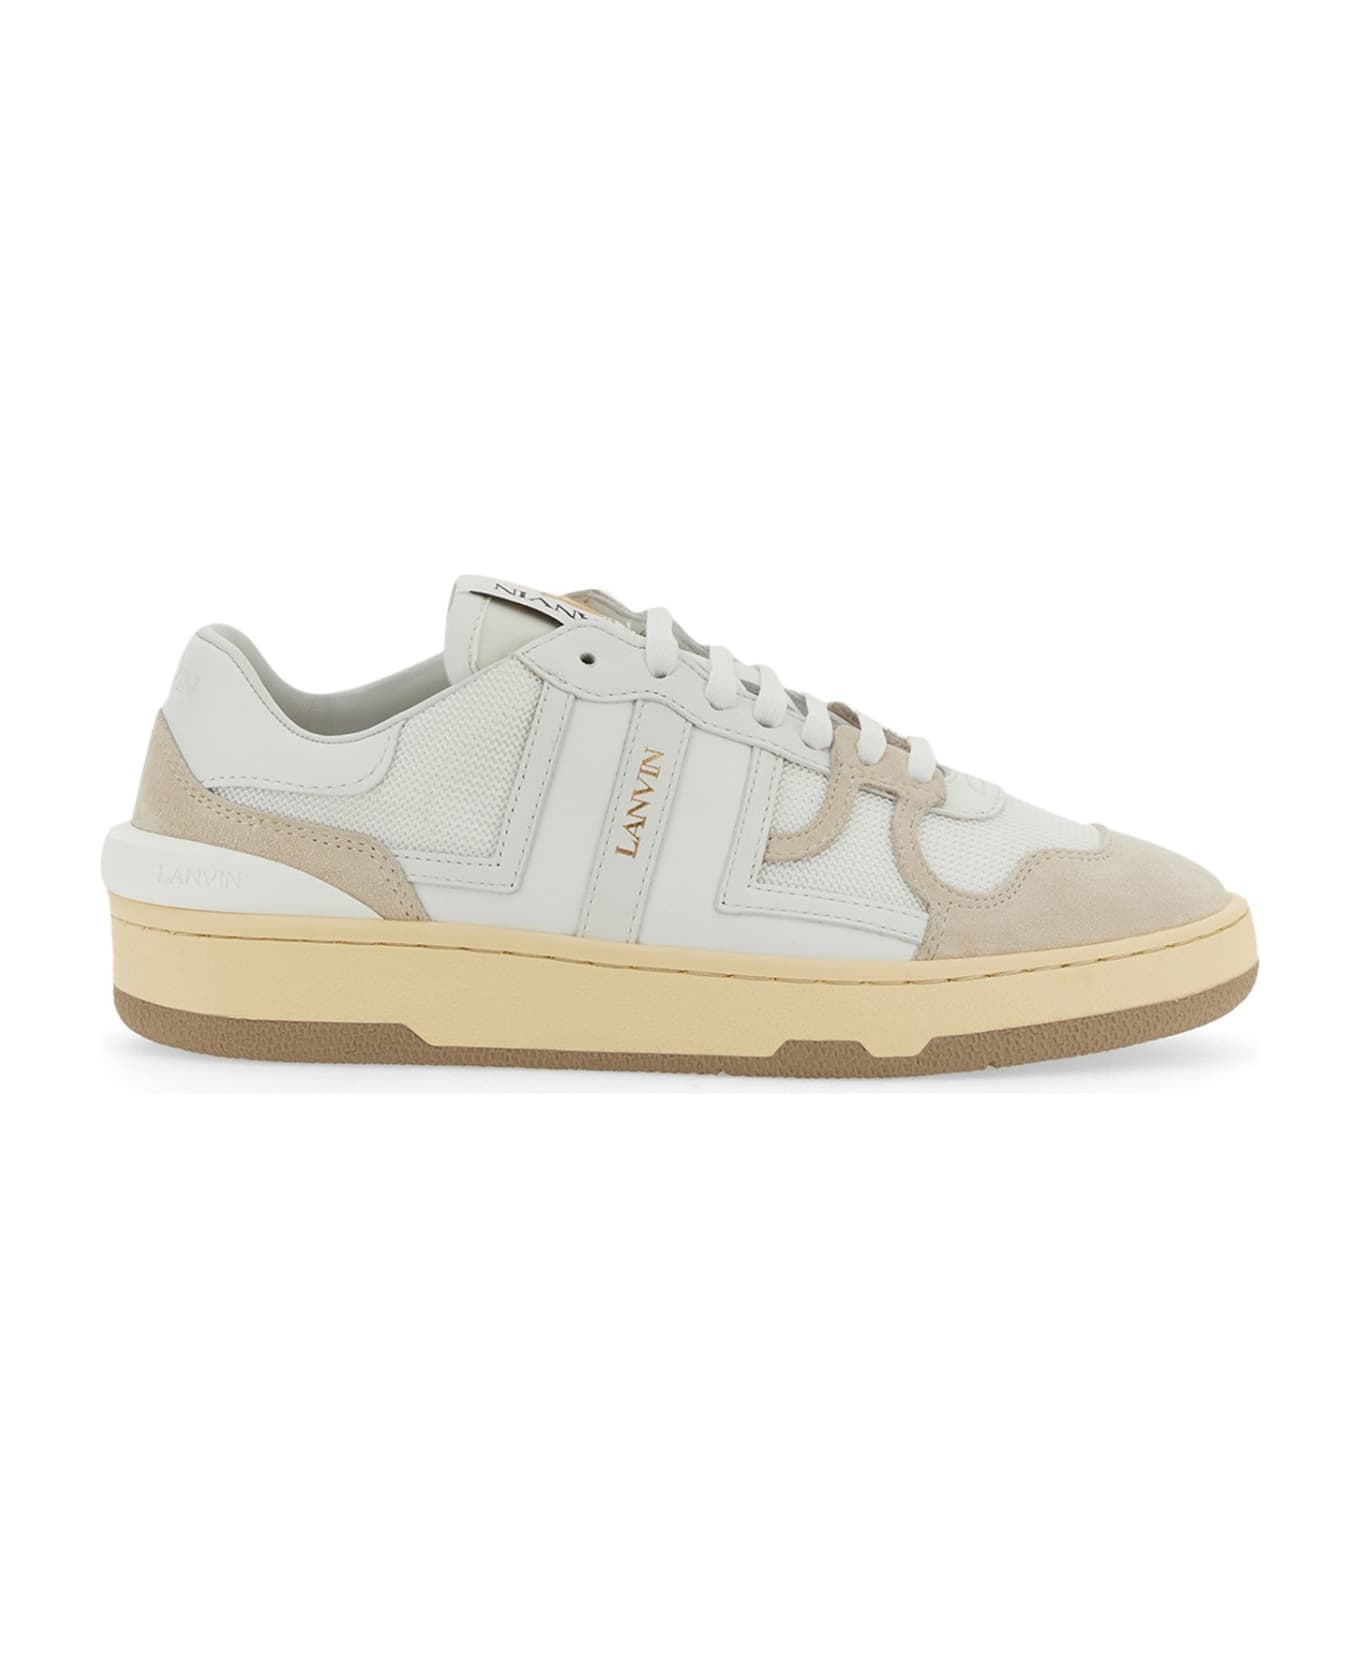 Lanvin Mesh, Suede And Nappa Leather Sneaker - Bianco スニーカー